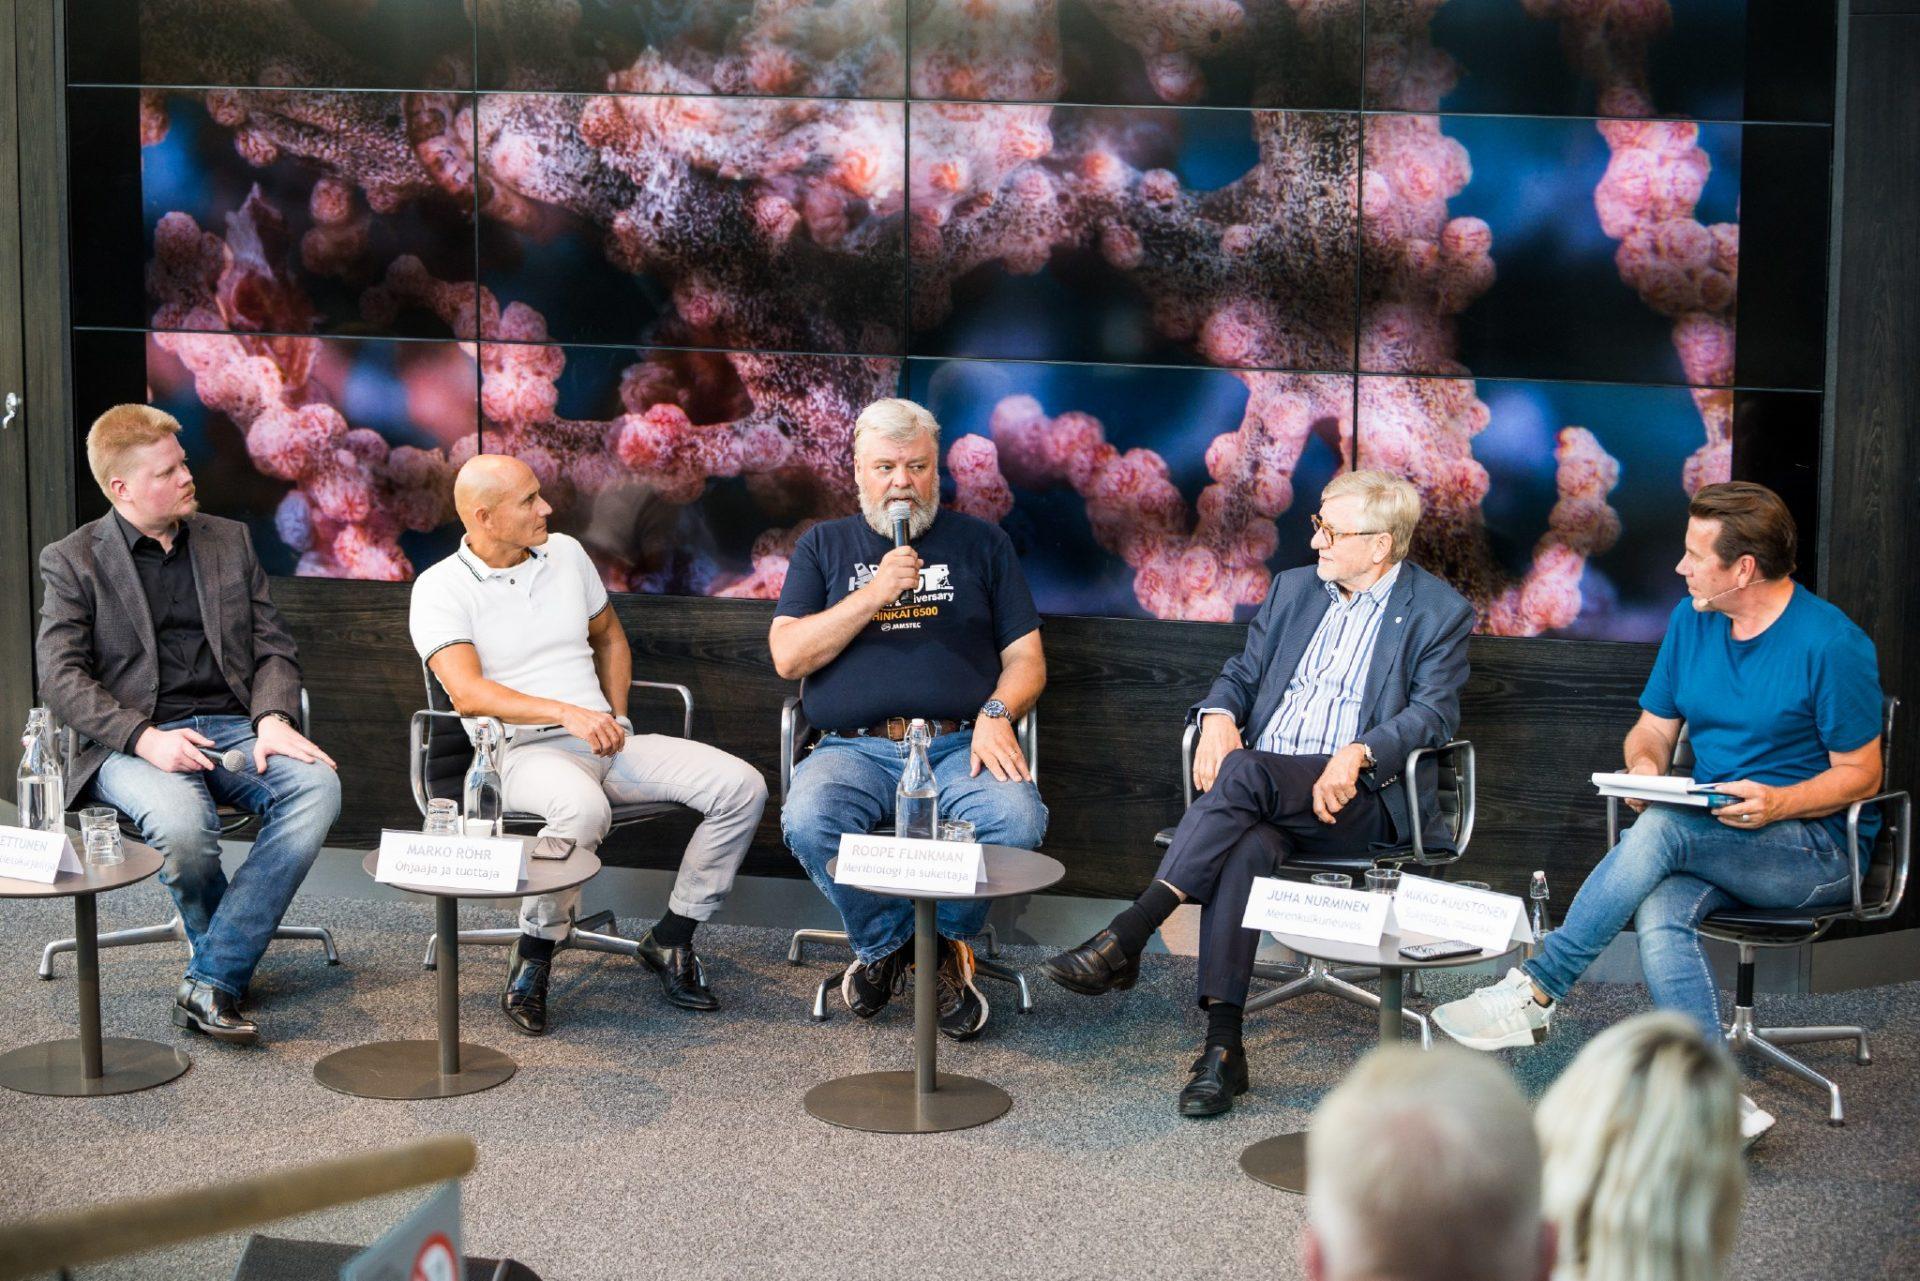 The Baltic Sea Day was launched on 29 August 2019 at the Media Piazza of Sanoma House.